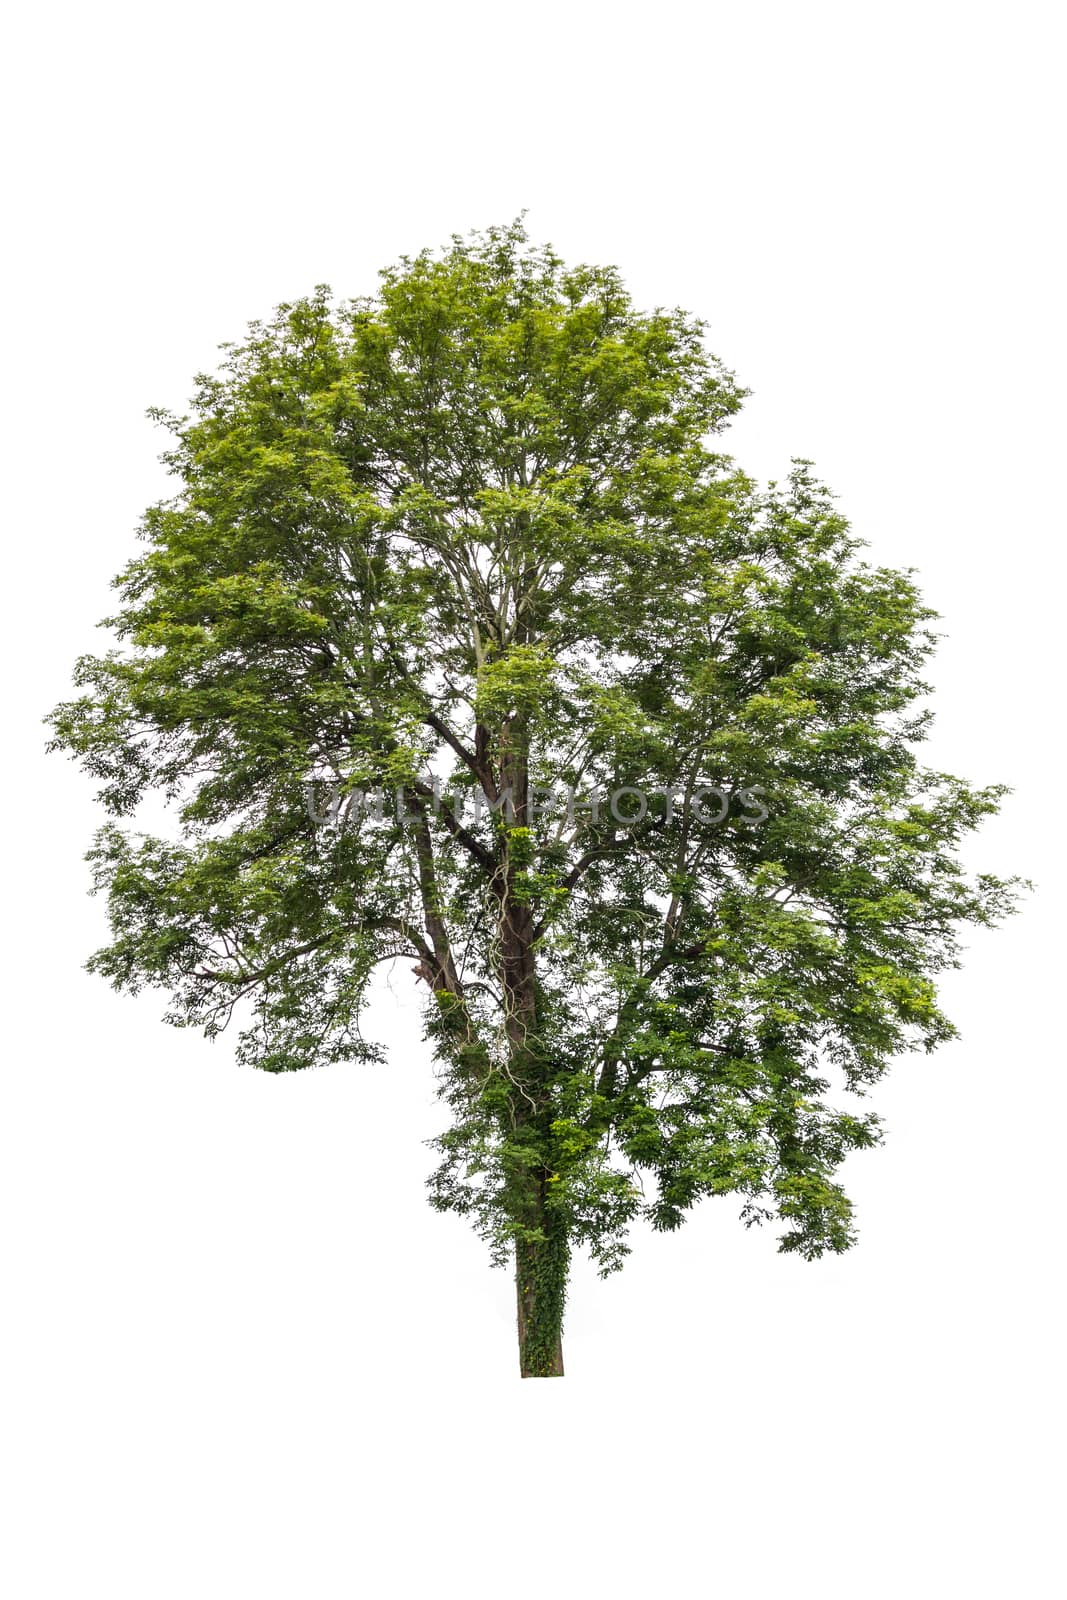 big green tree isolated on white background  by rakoptonLPN